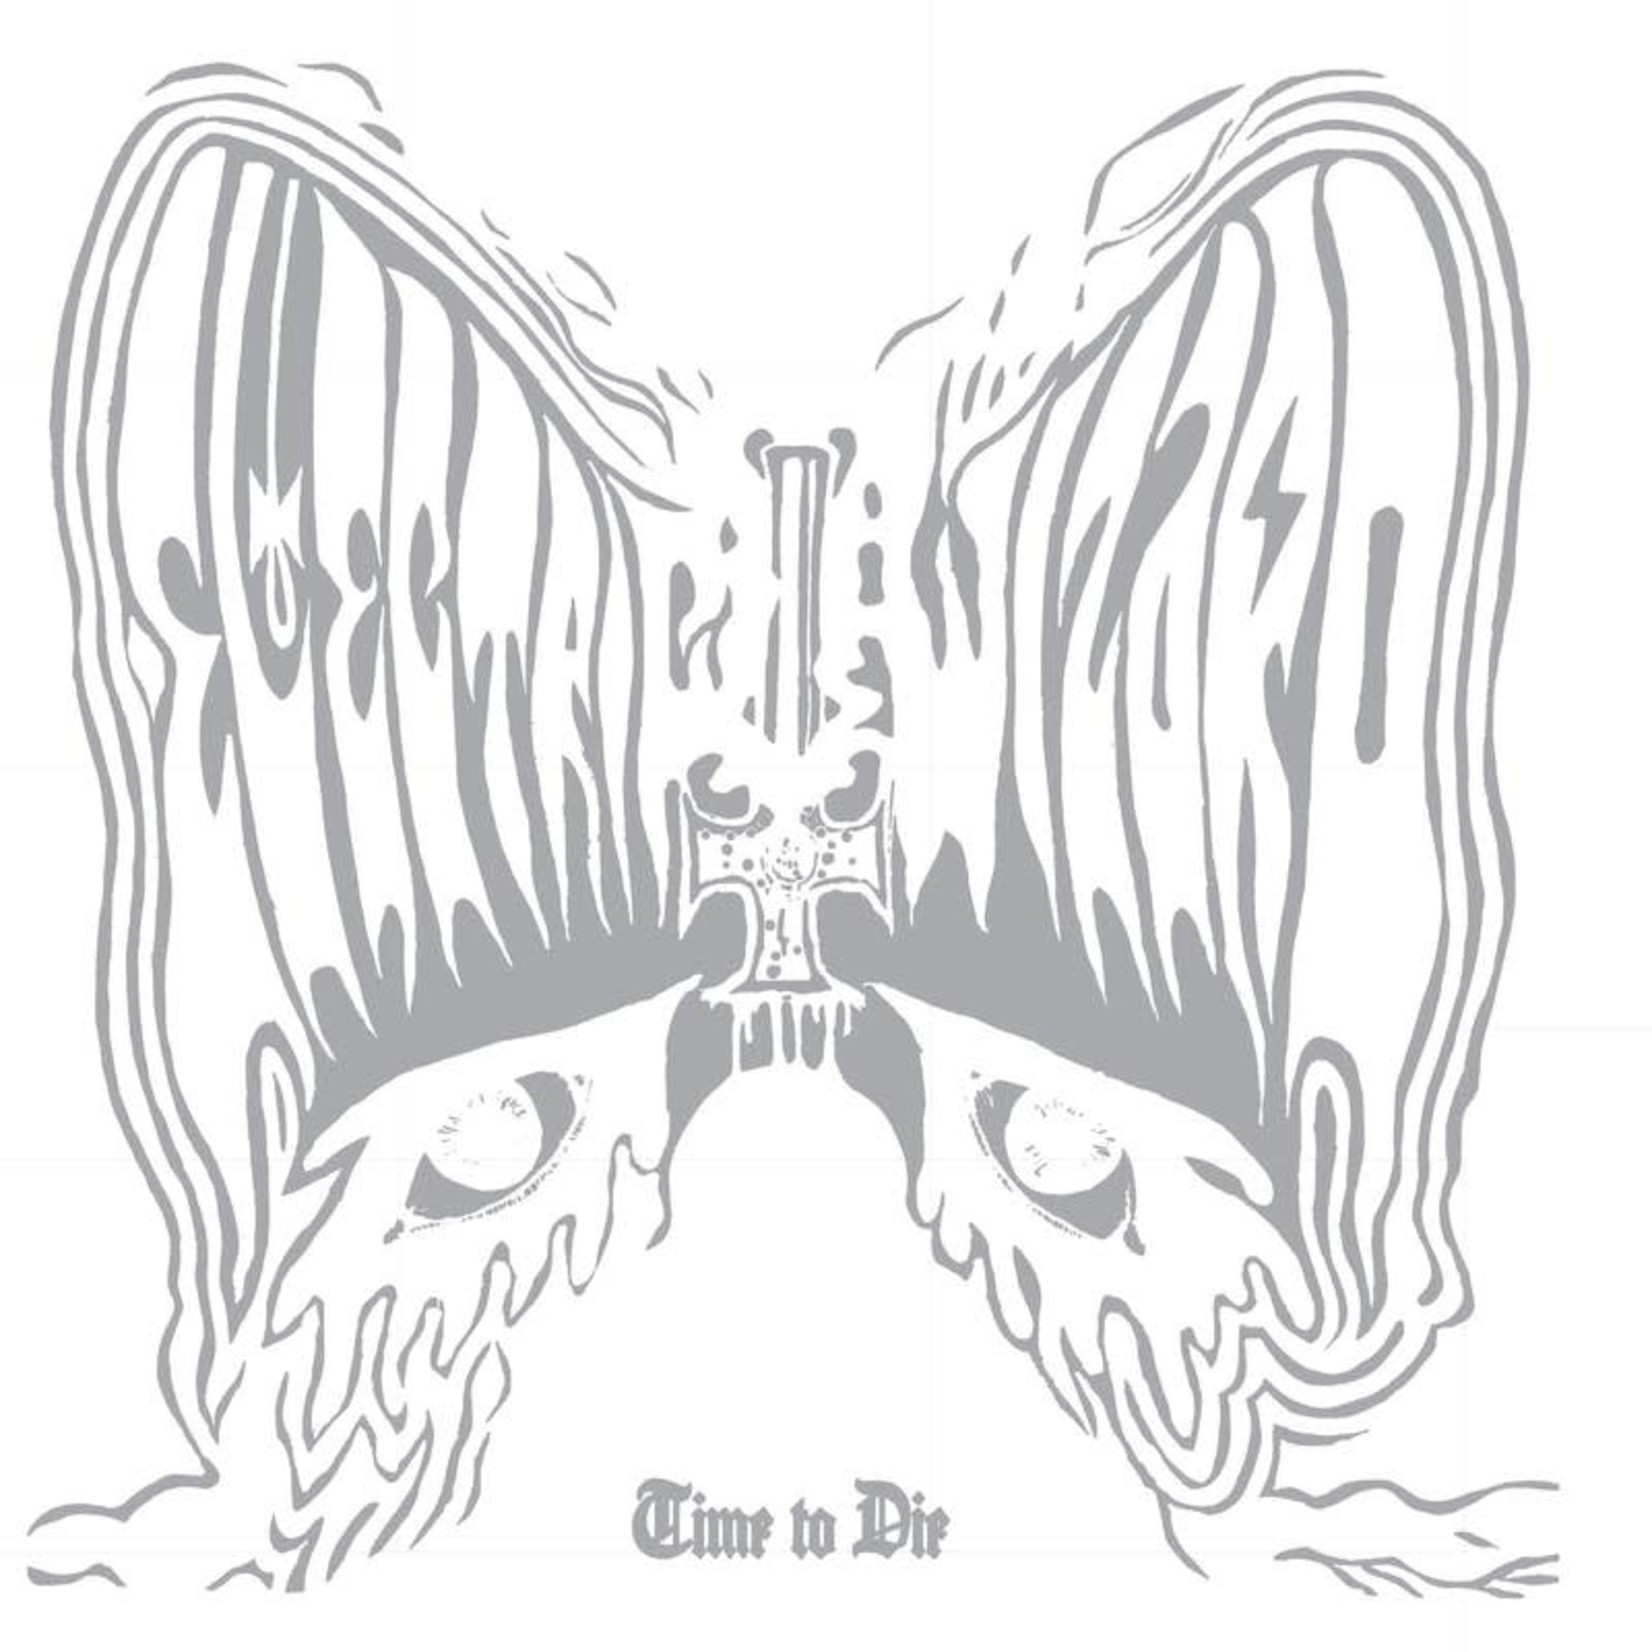 RSD Drops Electric Wizard - Time To Die (2LP) [Green]